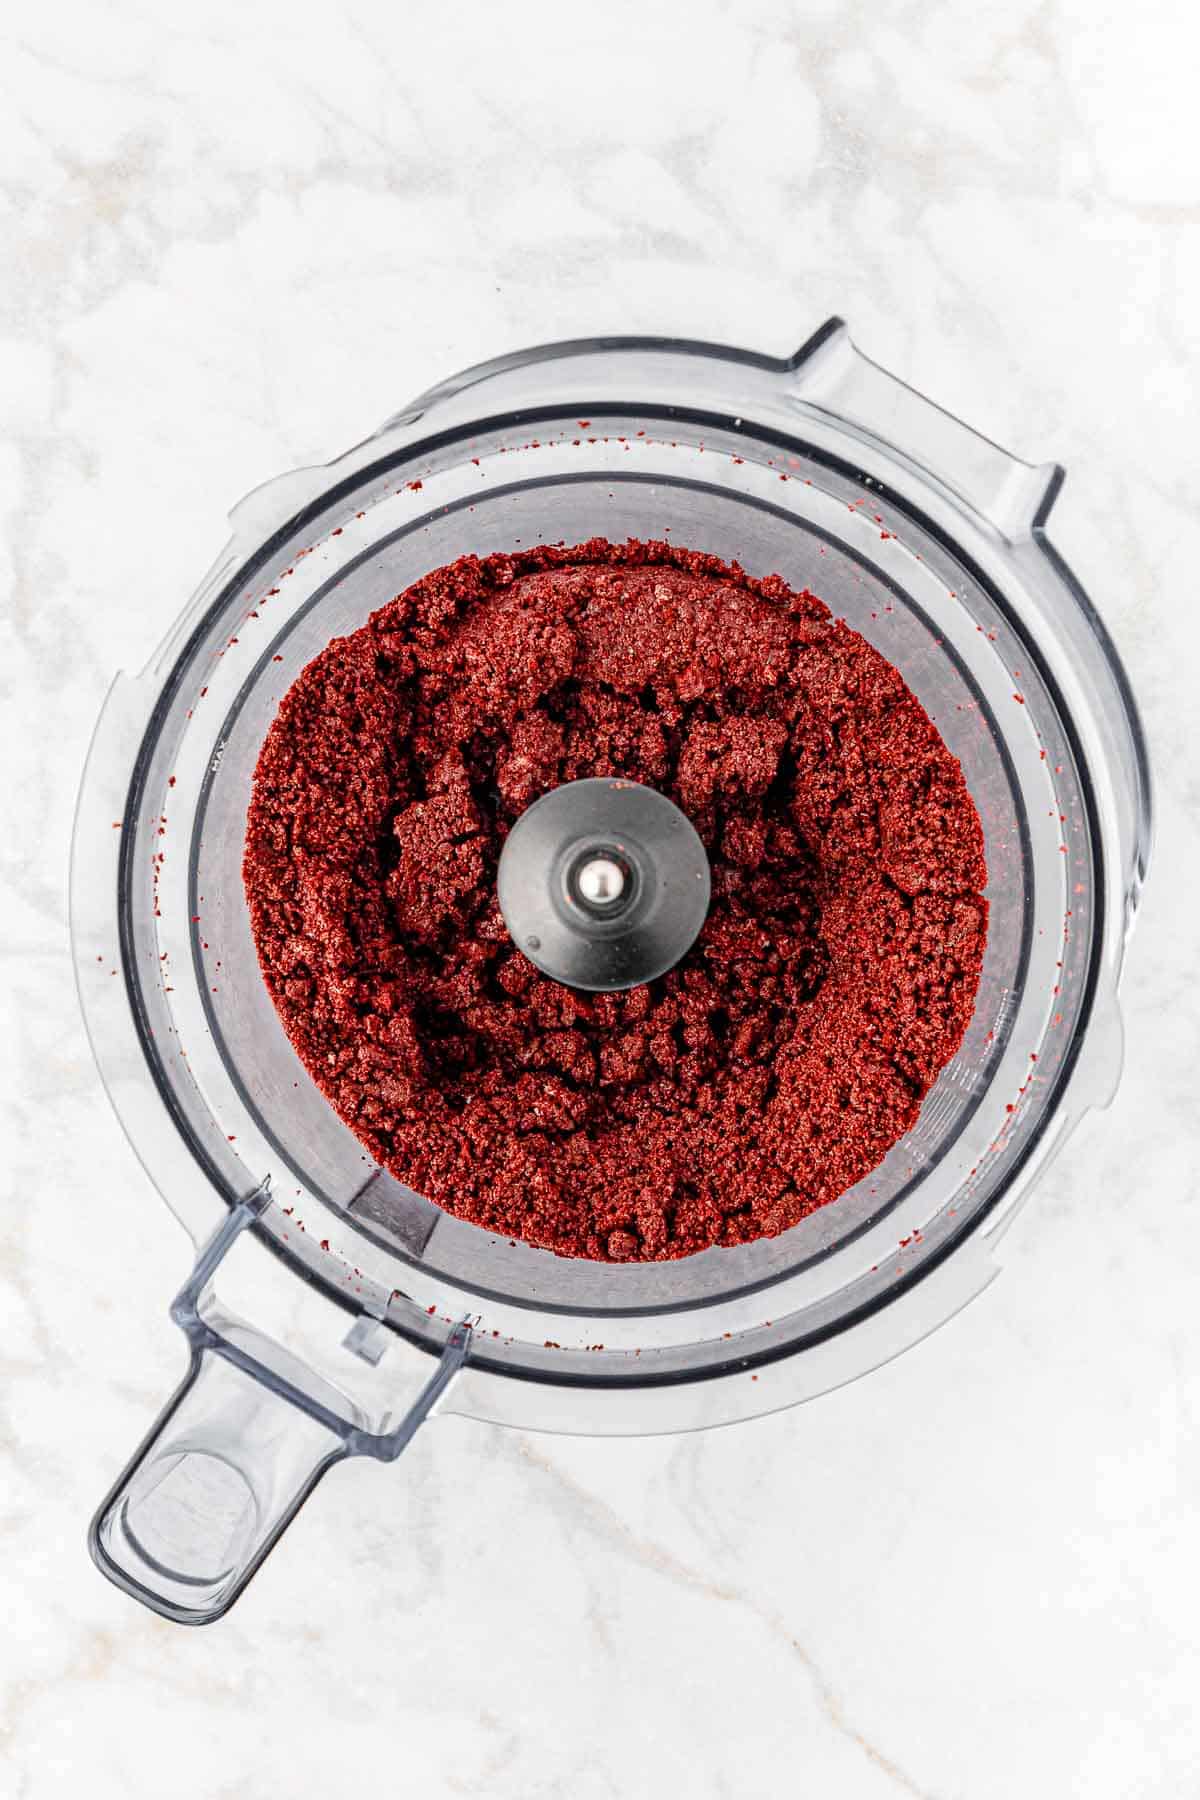 crushed red velvet oreos in a food processor on a marble countertop.